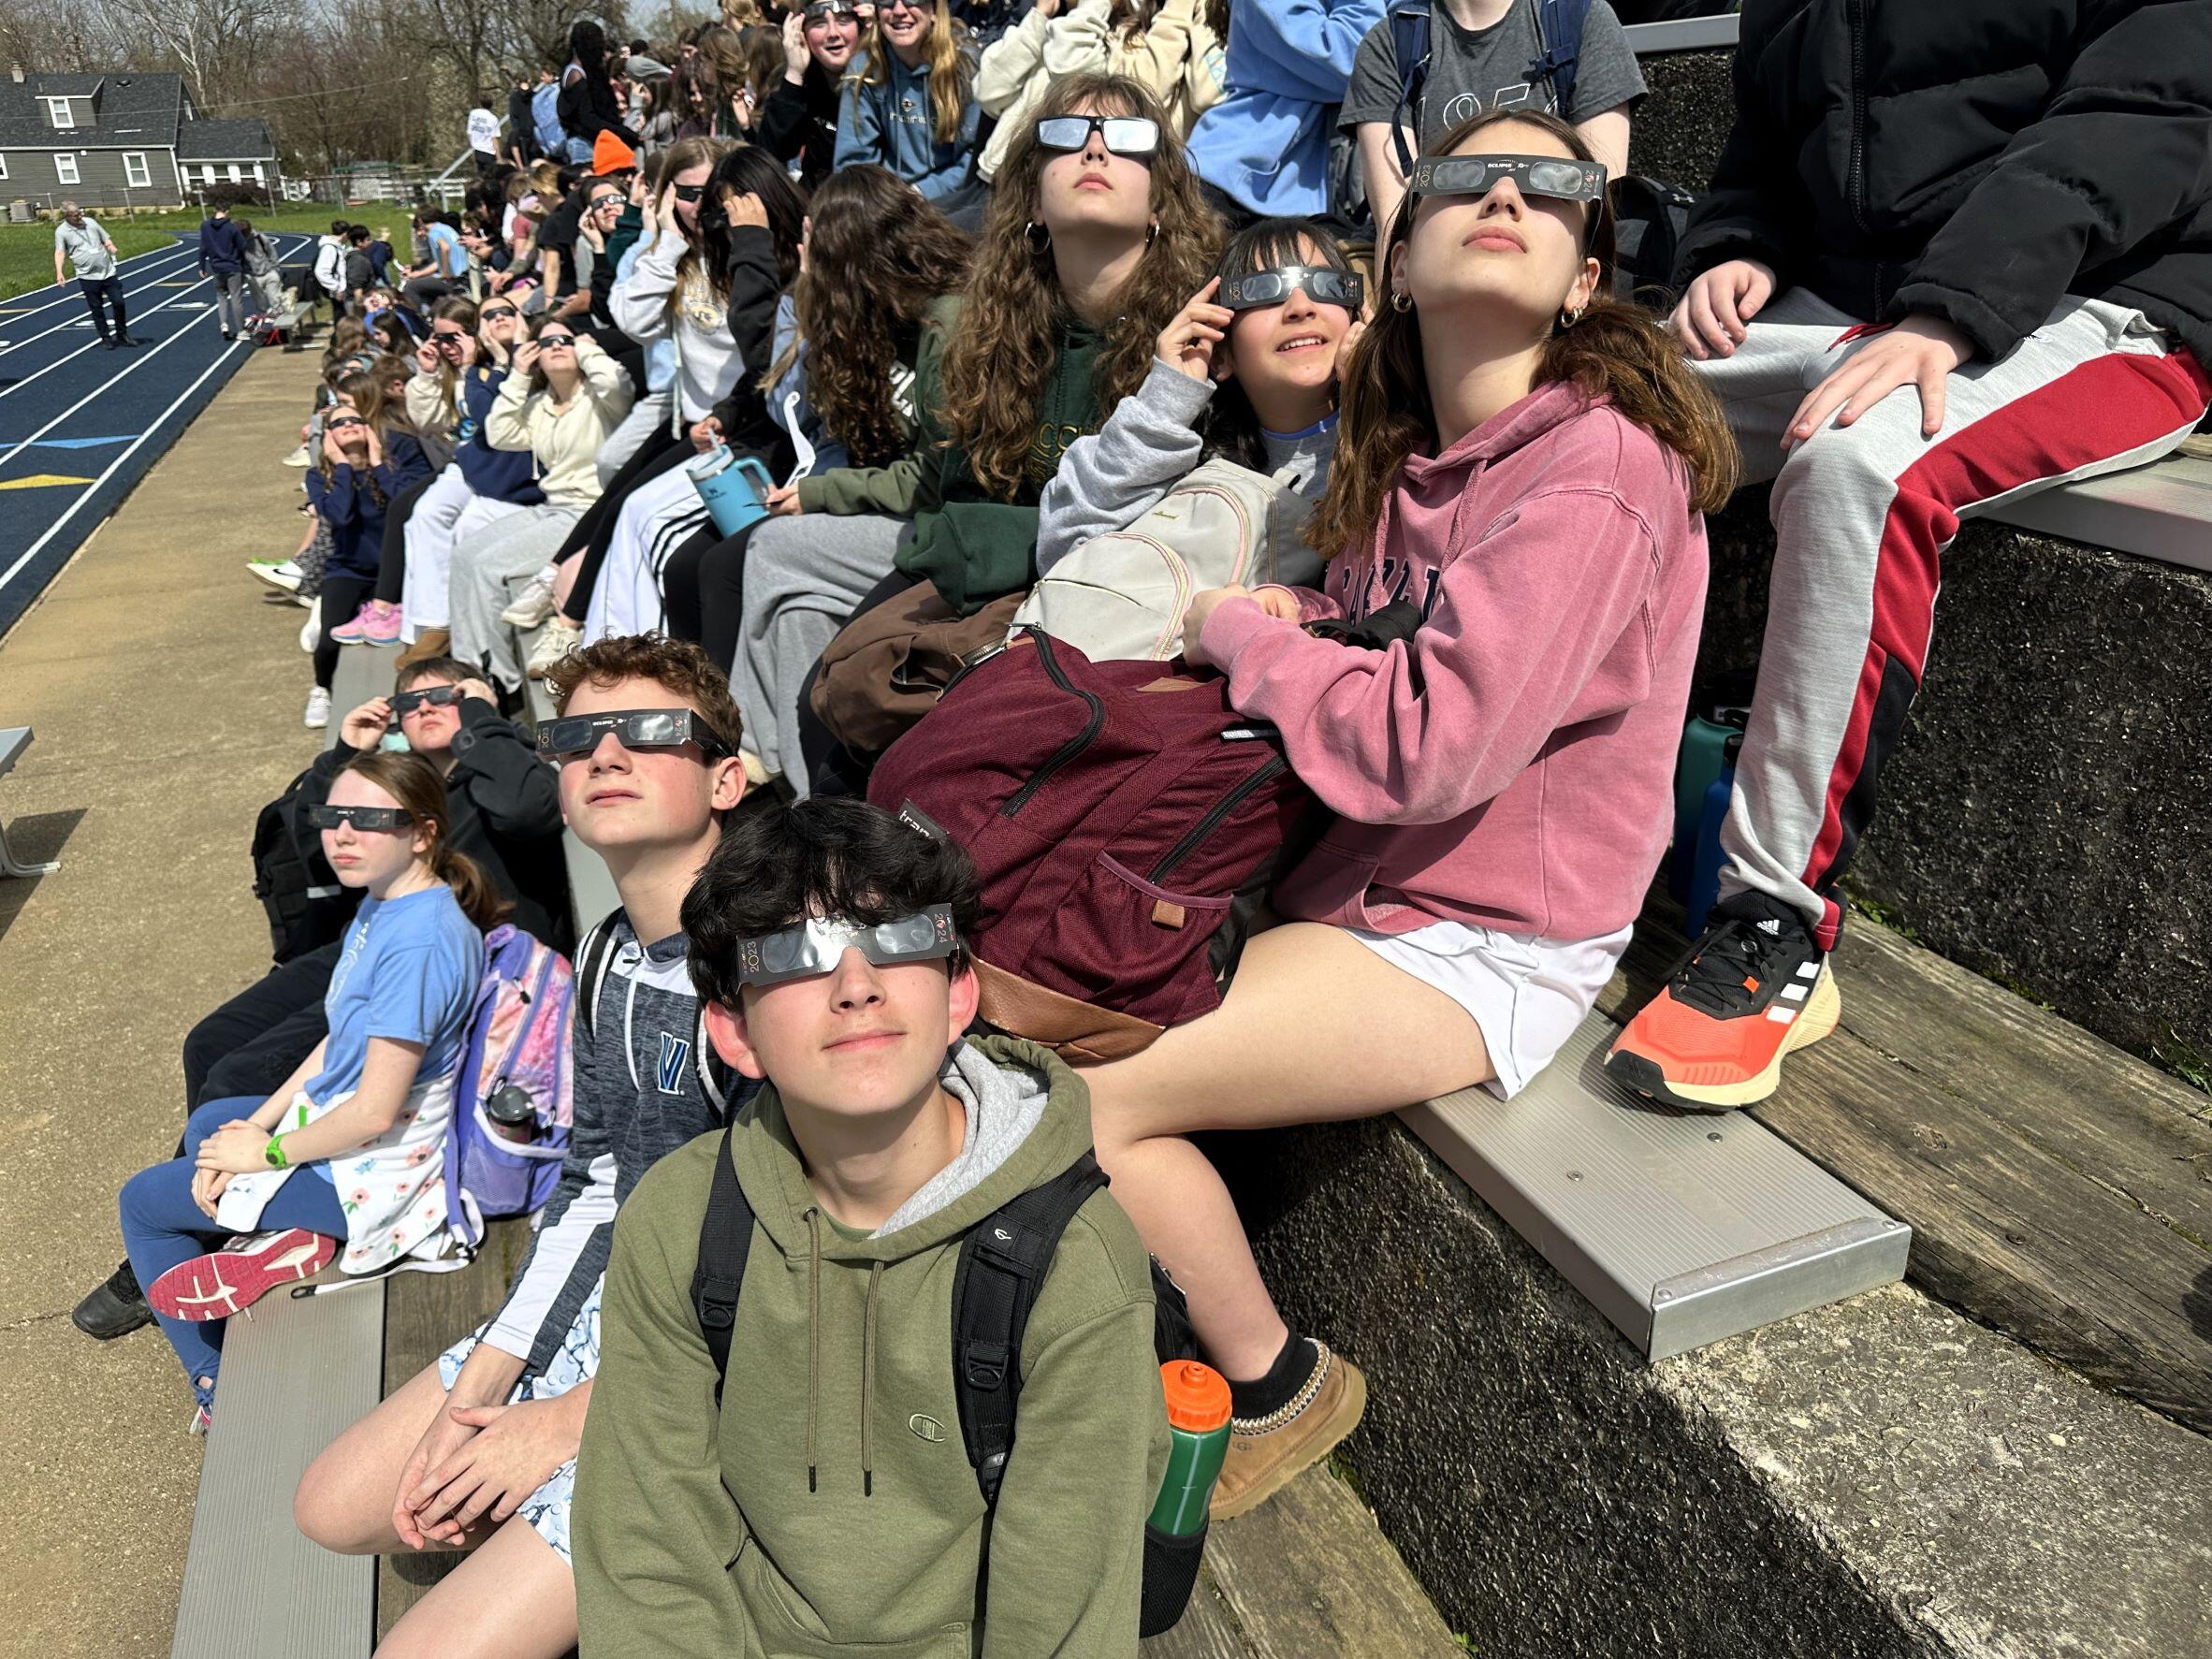 A large group of kids (over 50) sitting on the bleachers all wearing their eclipse glasses looking up at the sun